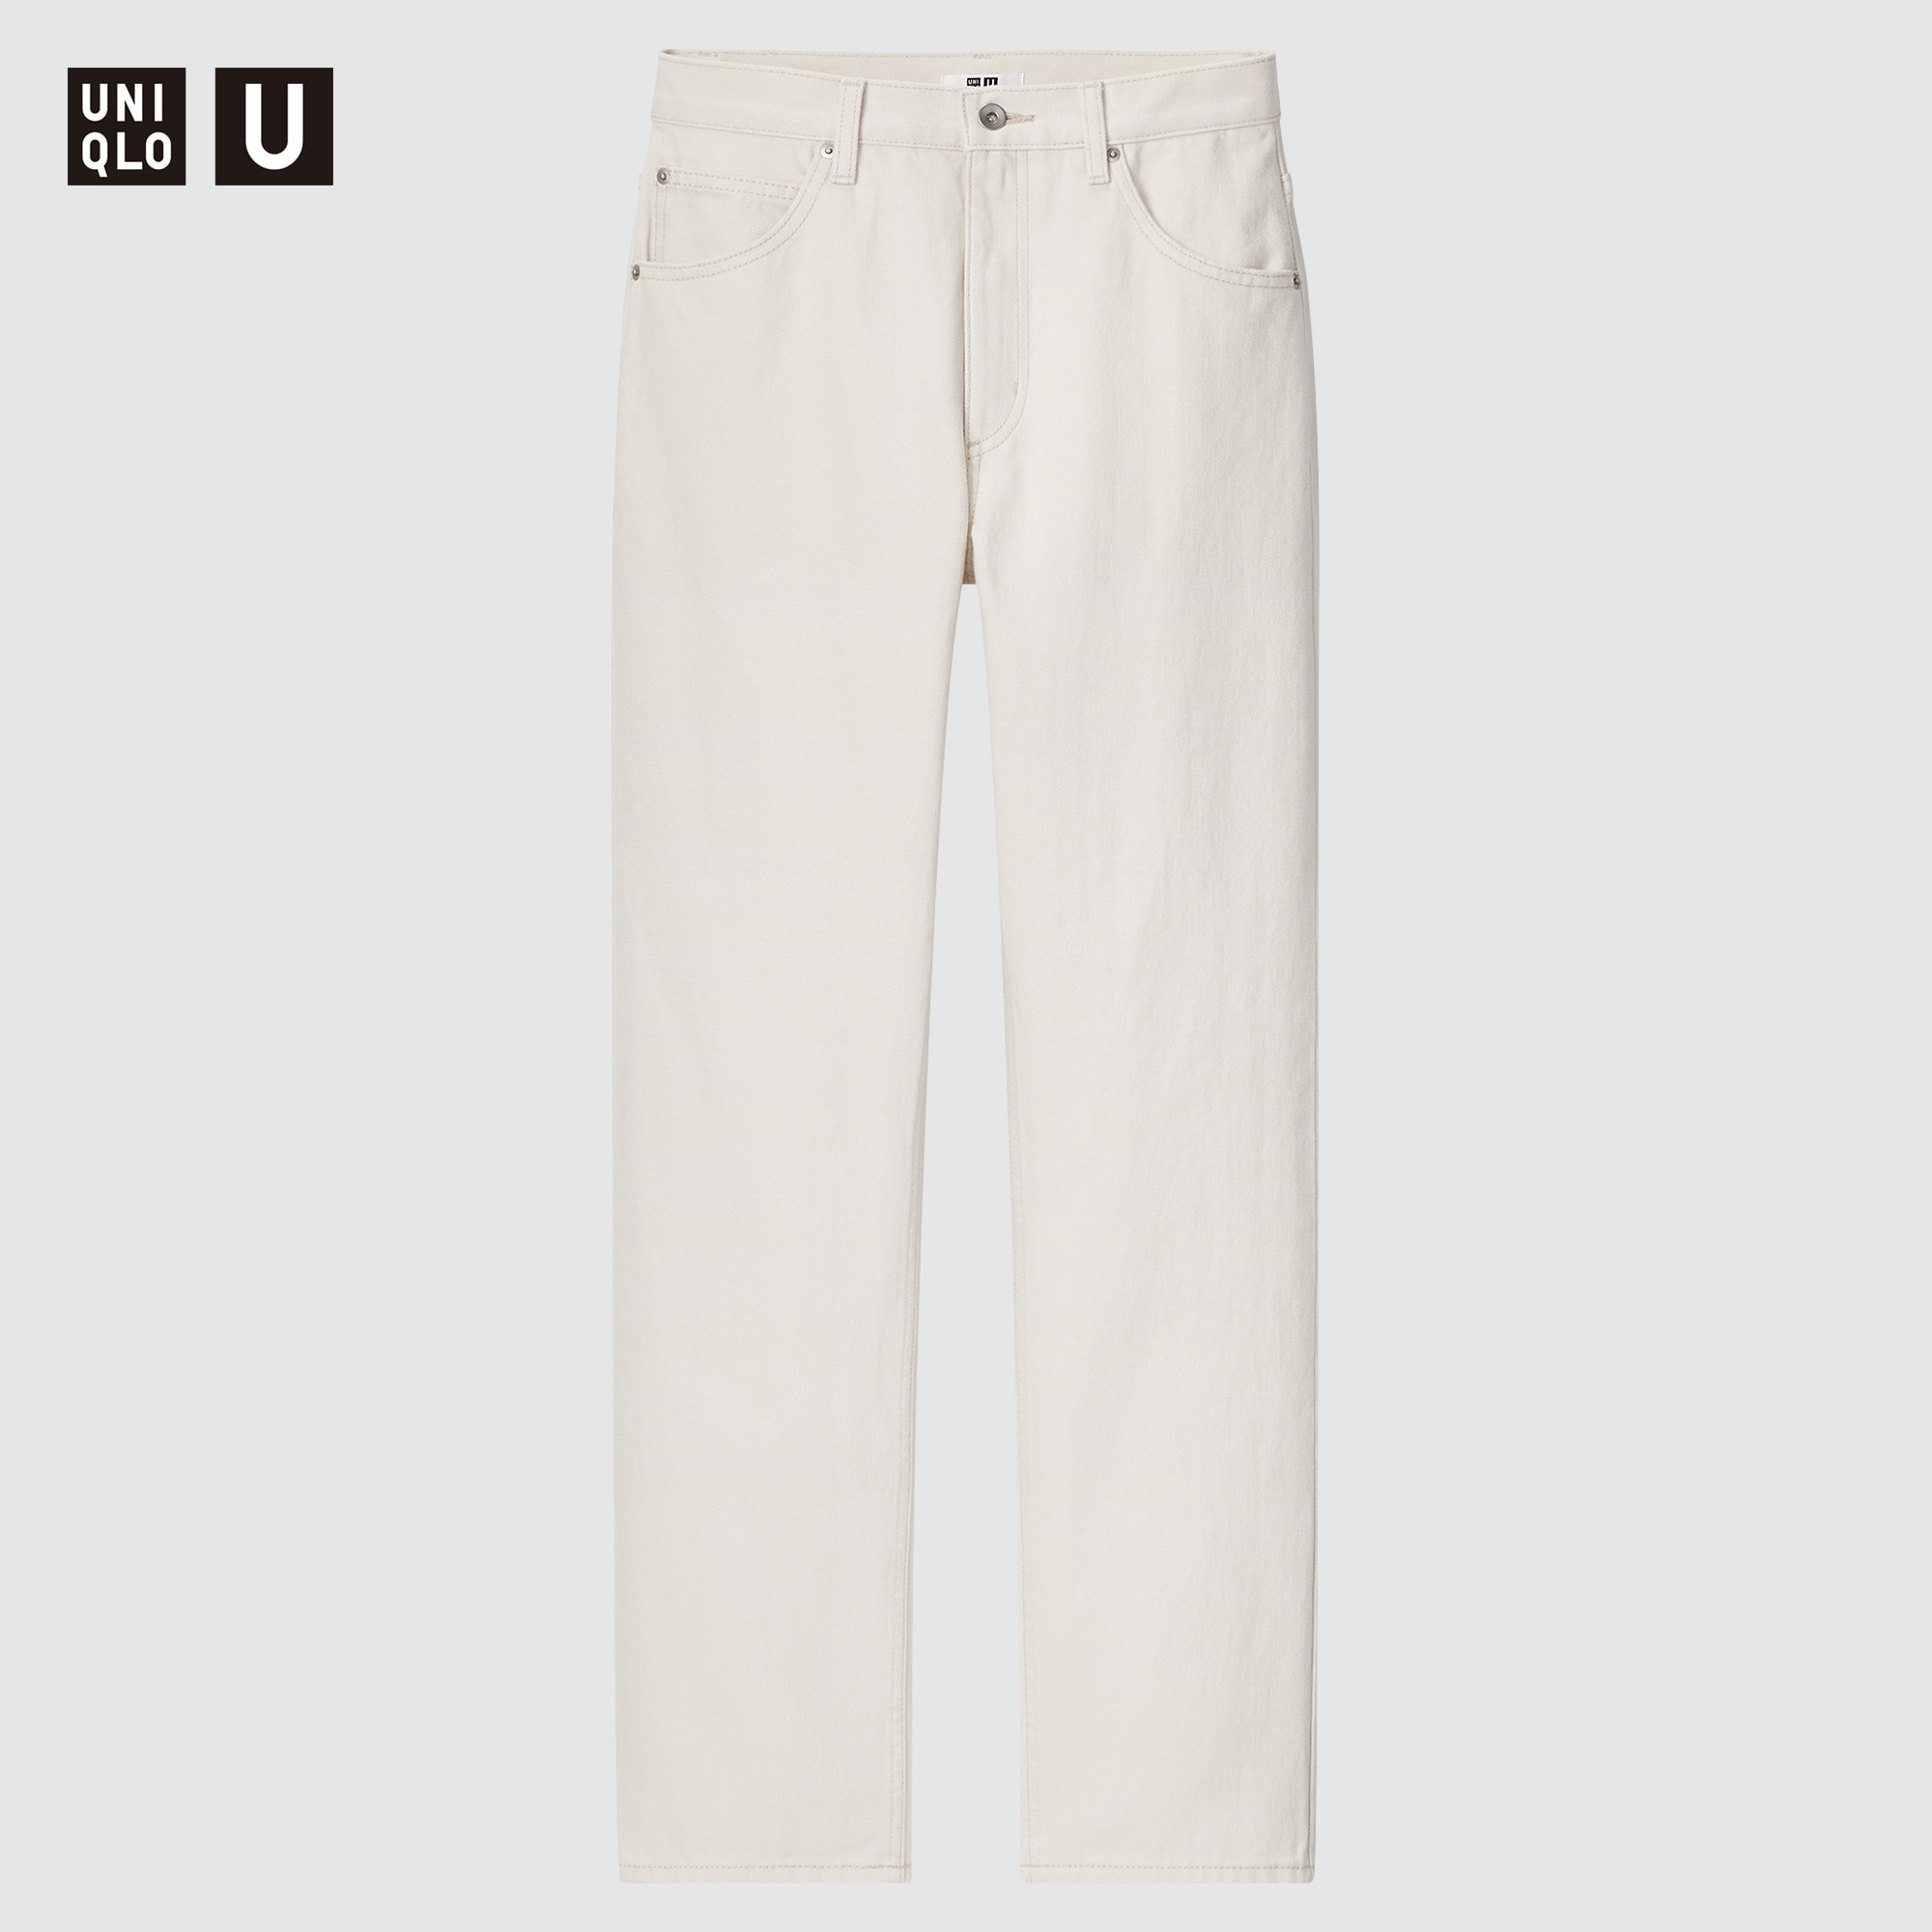 Outfit ideas of「U Regular-Fit Straight Jeans」| UNIQLO US